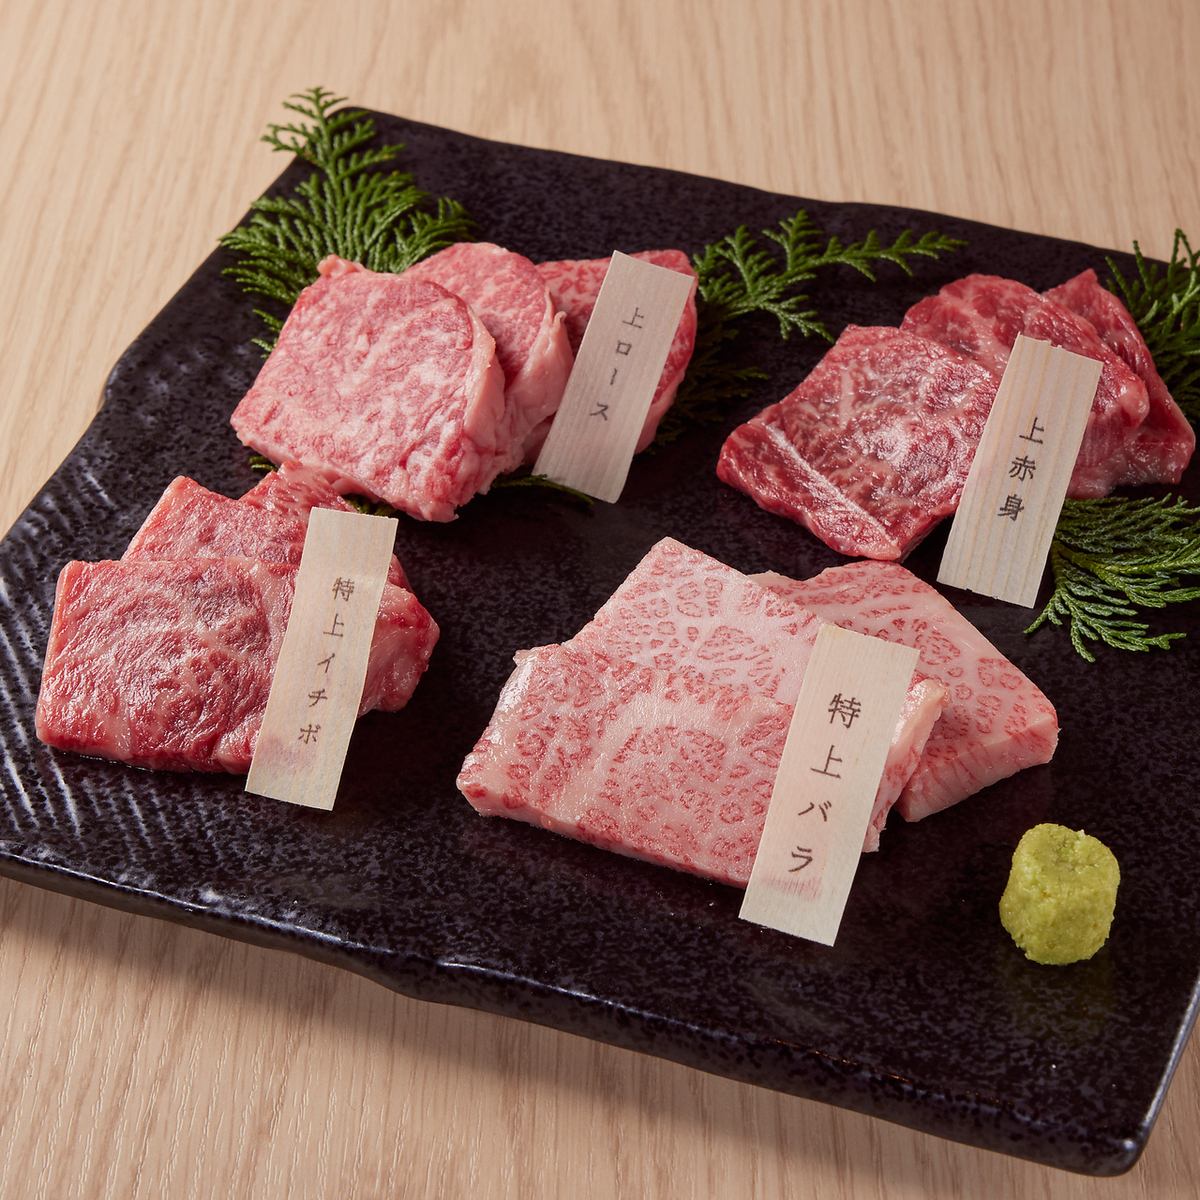 High-quality exquisite meat to enjoy in a calm shop!